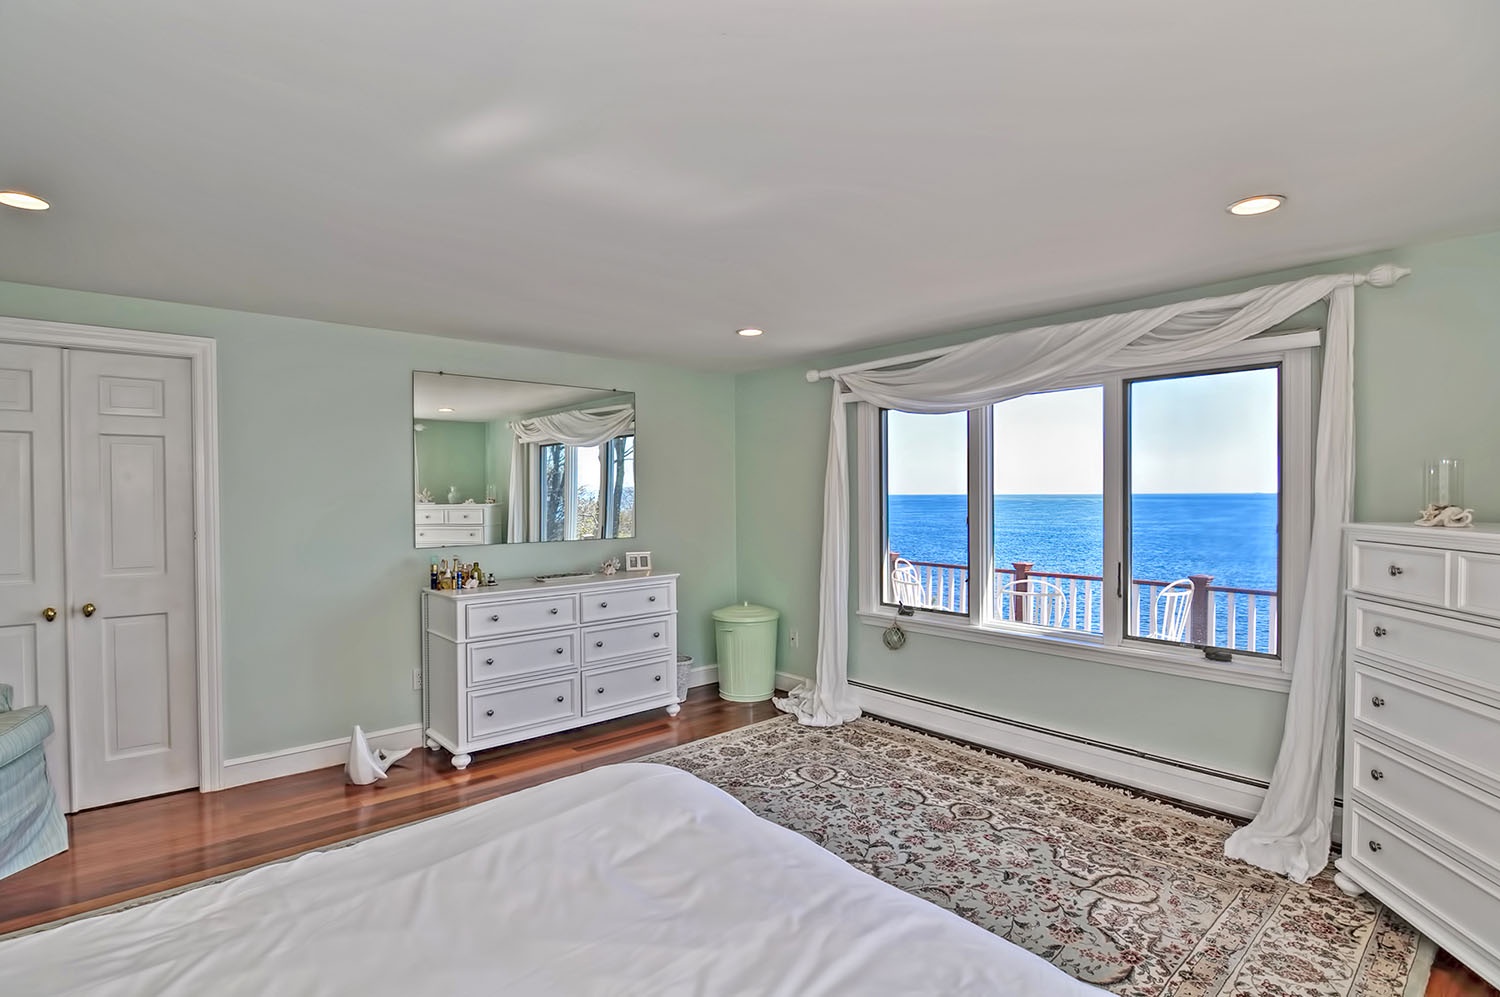 The primary bedroom has a glorious ocean view.